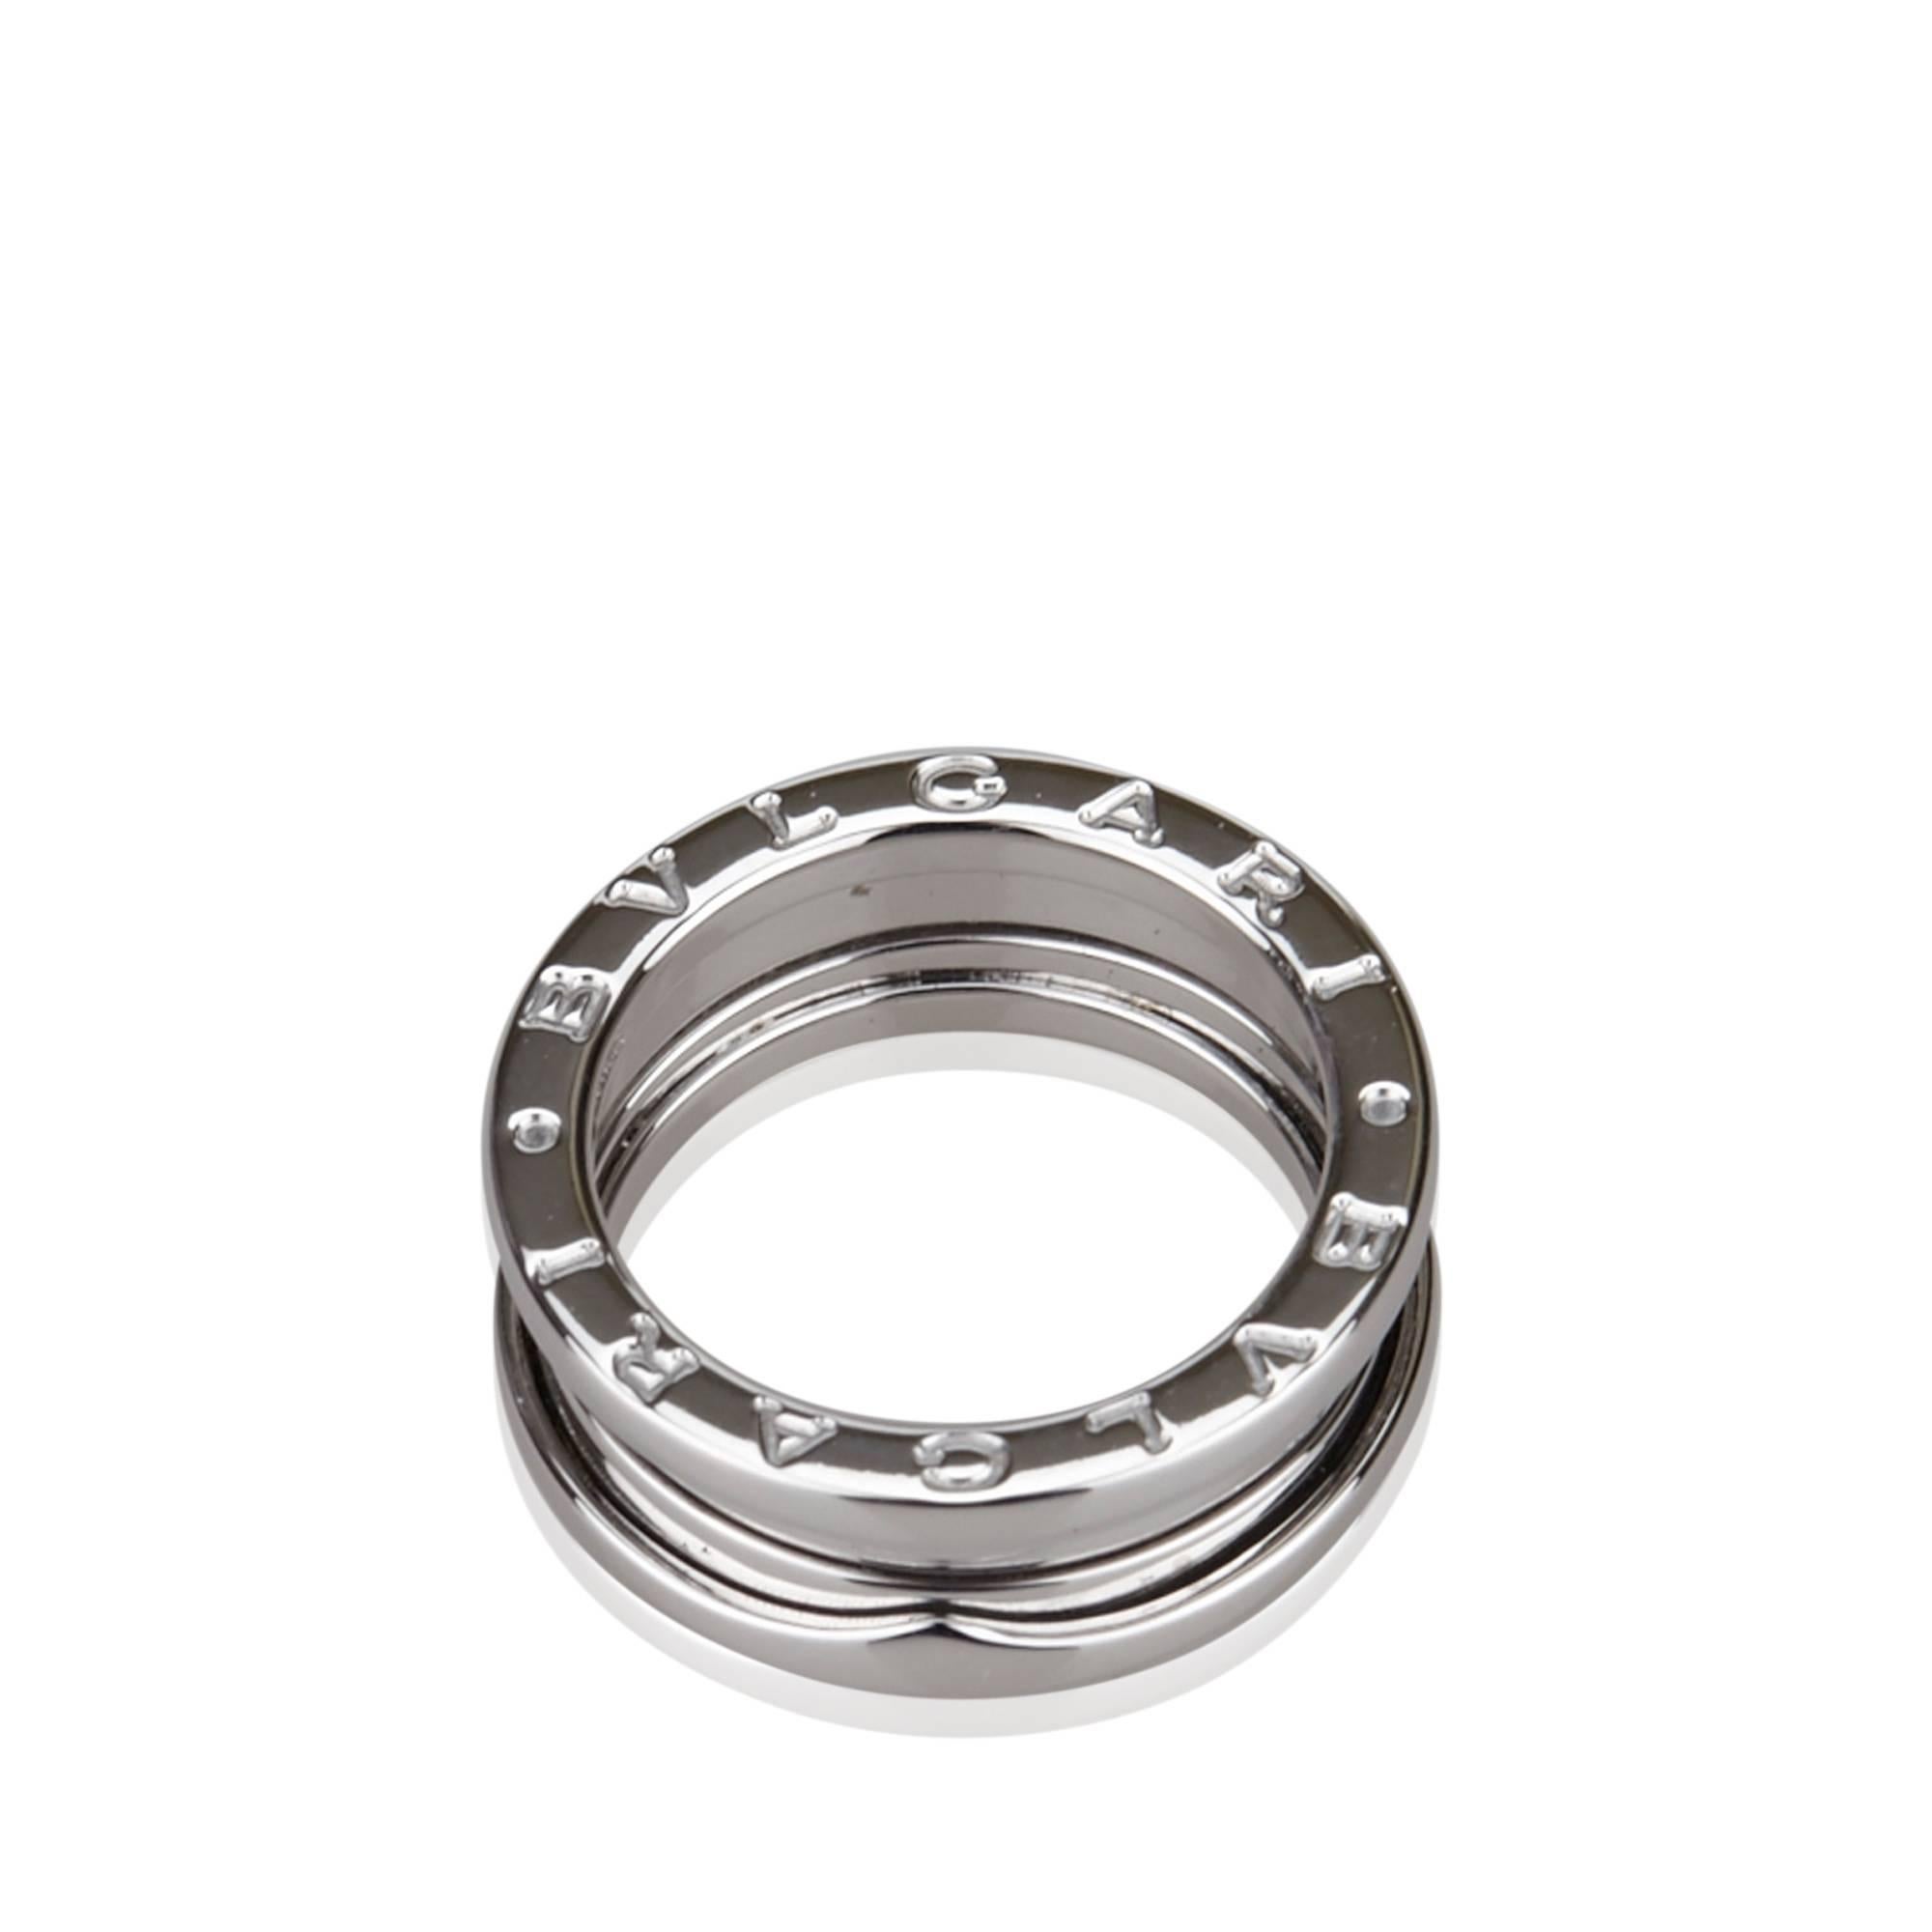 Product details:  White gold B.Zero 1 ring by Bvlgari.  Engraved details. Size 6.
Condition: Excellent. 

